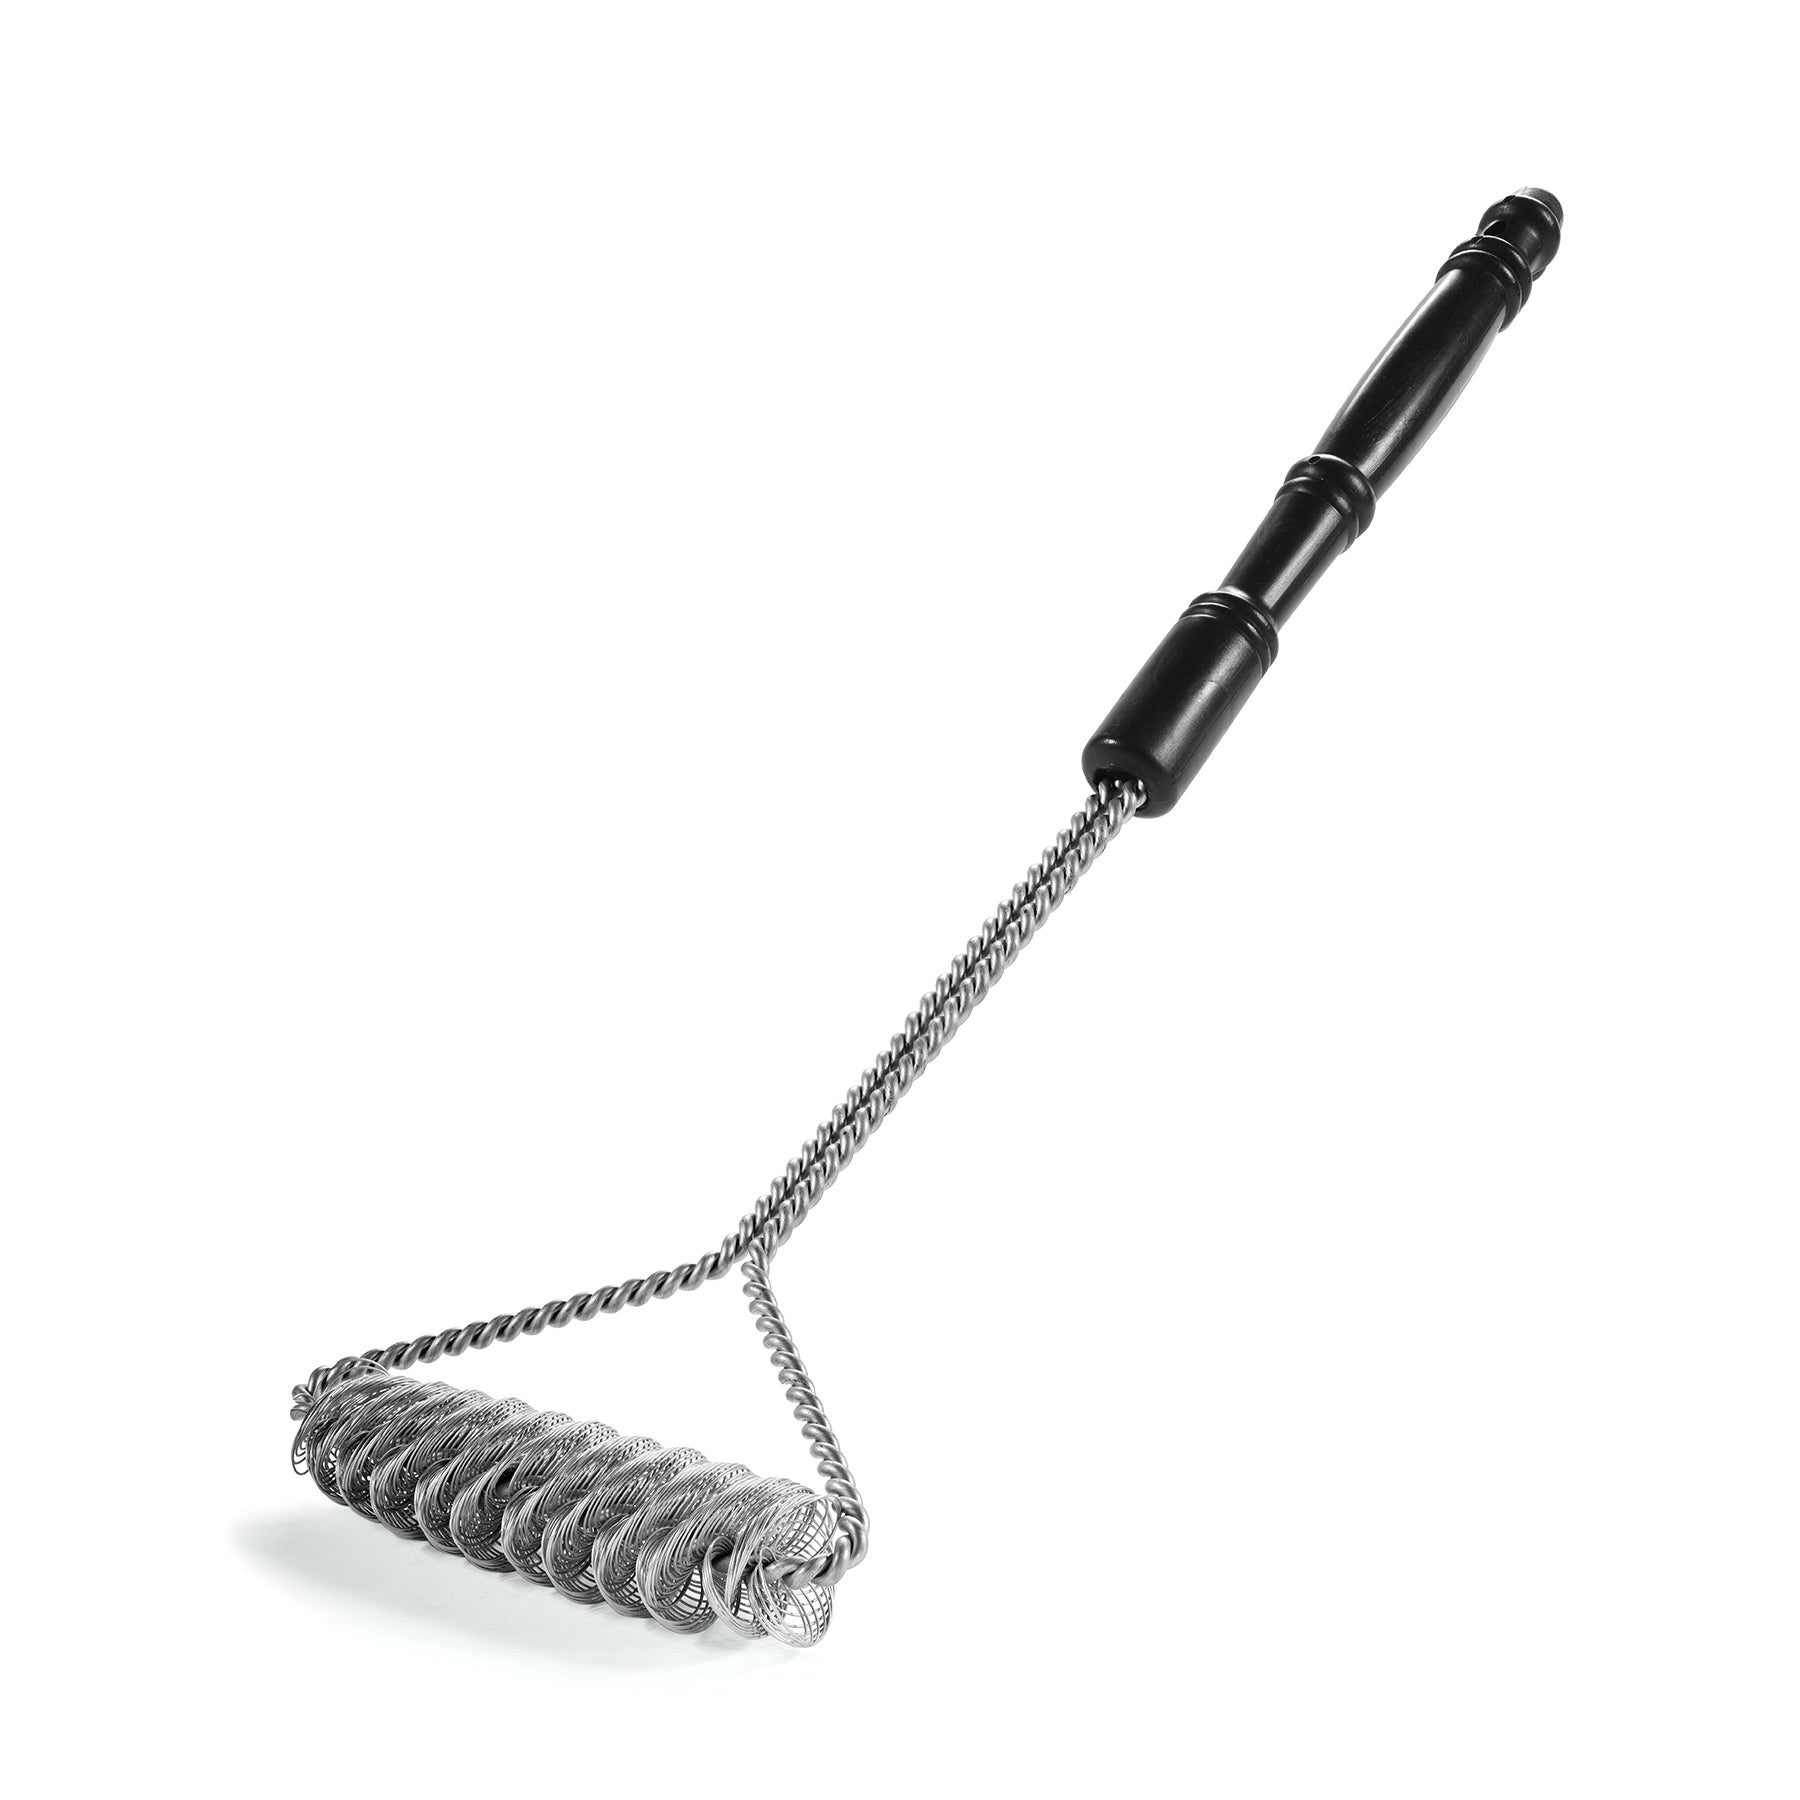 Jelly Comb 16.5 BBQ Grill Brush Bristle Free Stainless Steel BBQ Cleaning  Brush with Super Wide Scraper for Efficiently Cleaning - 3in1 Helix Brushes  Design Safe Grill Cleaning Brush 